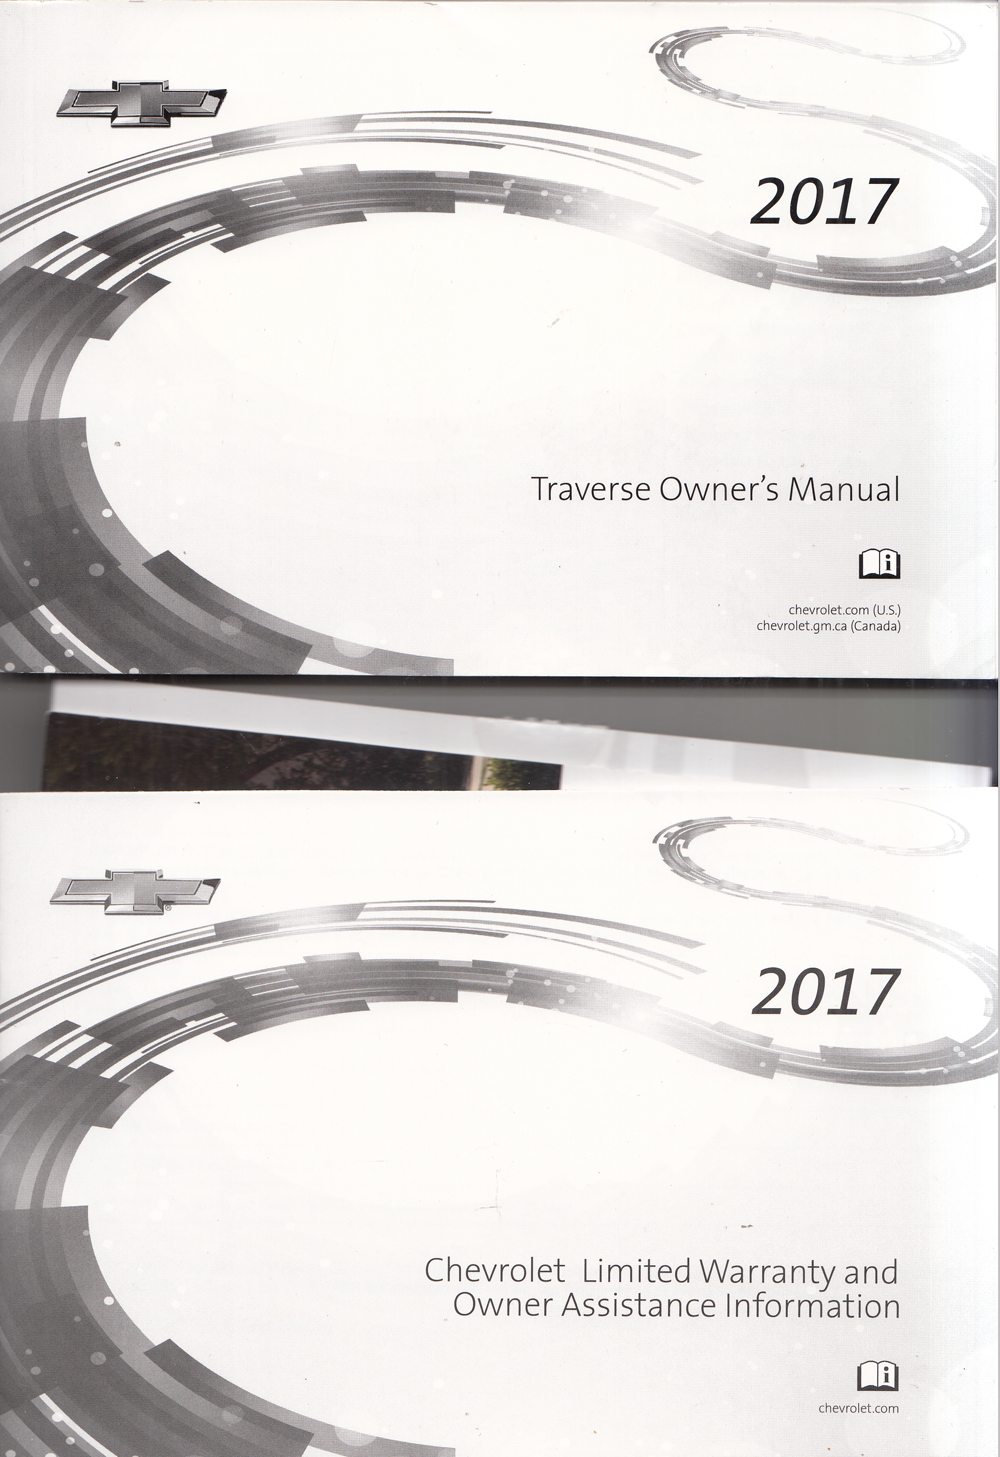 2017 Chevrolet Traverse Owners Manual with Pamphlets Original